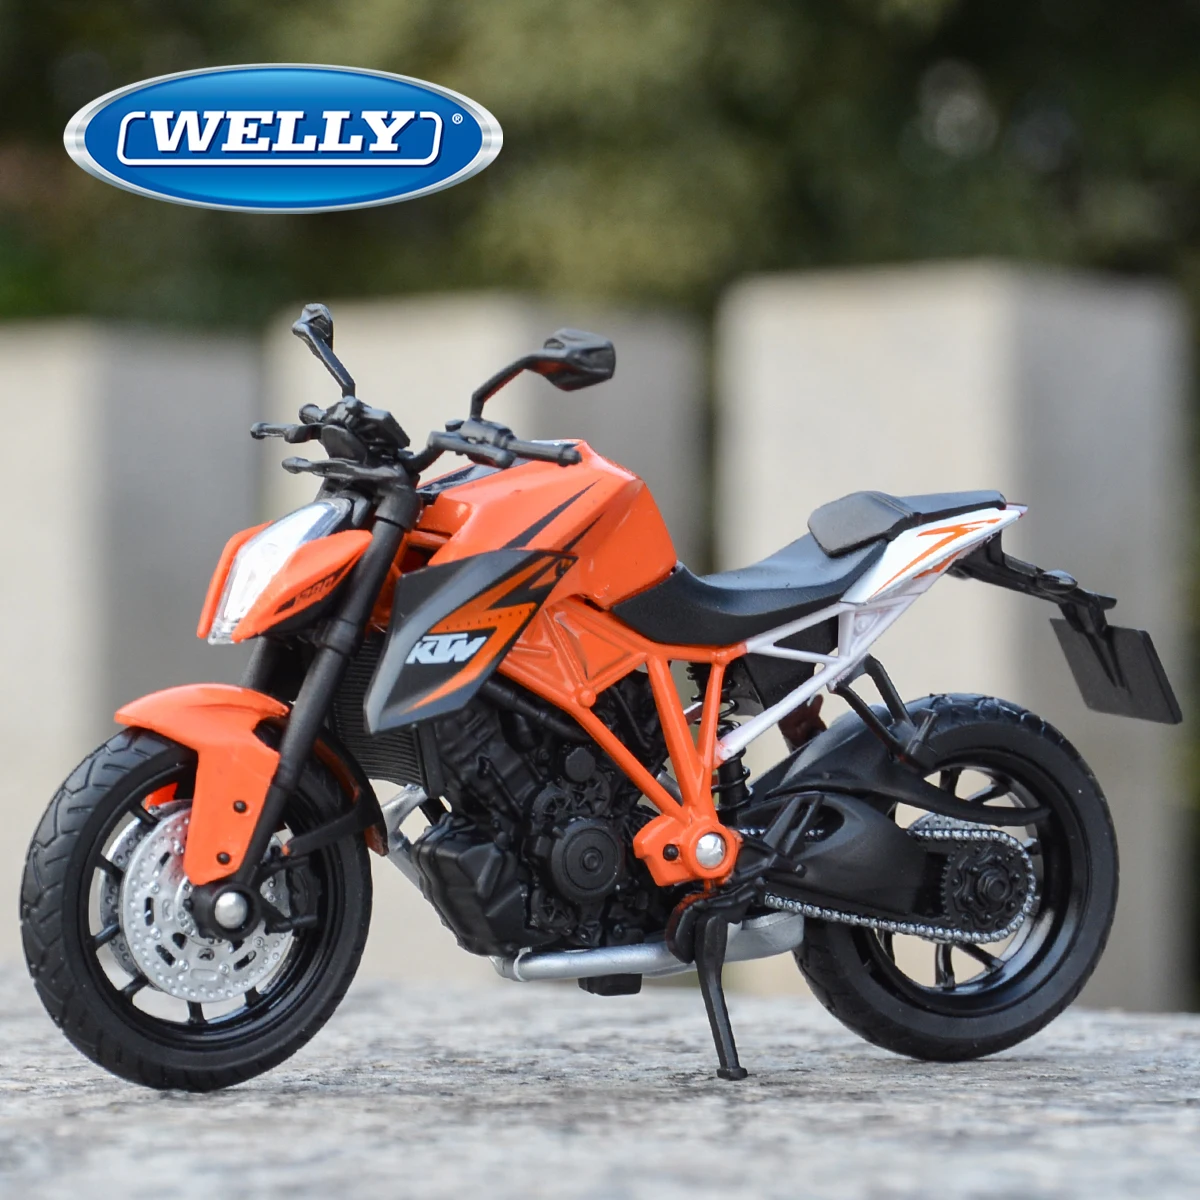 Welly 1:18 KTM 1290 Super Duke R Die Cast Vehicles Collectible Hobbies Motorcycle Model Toys